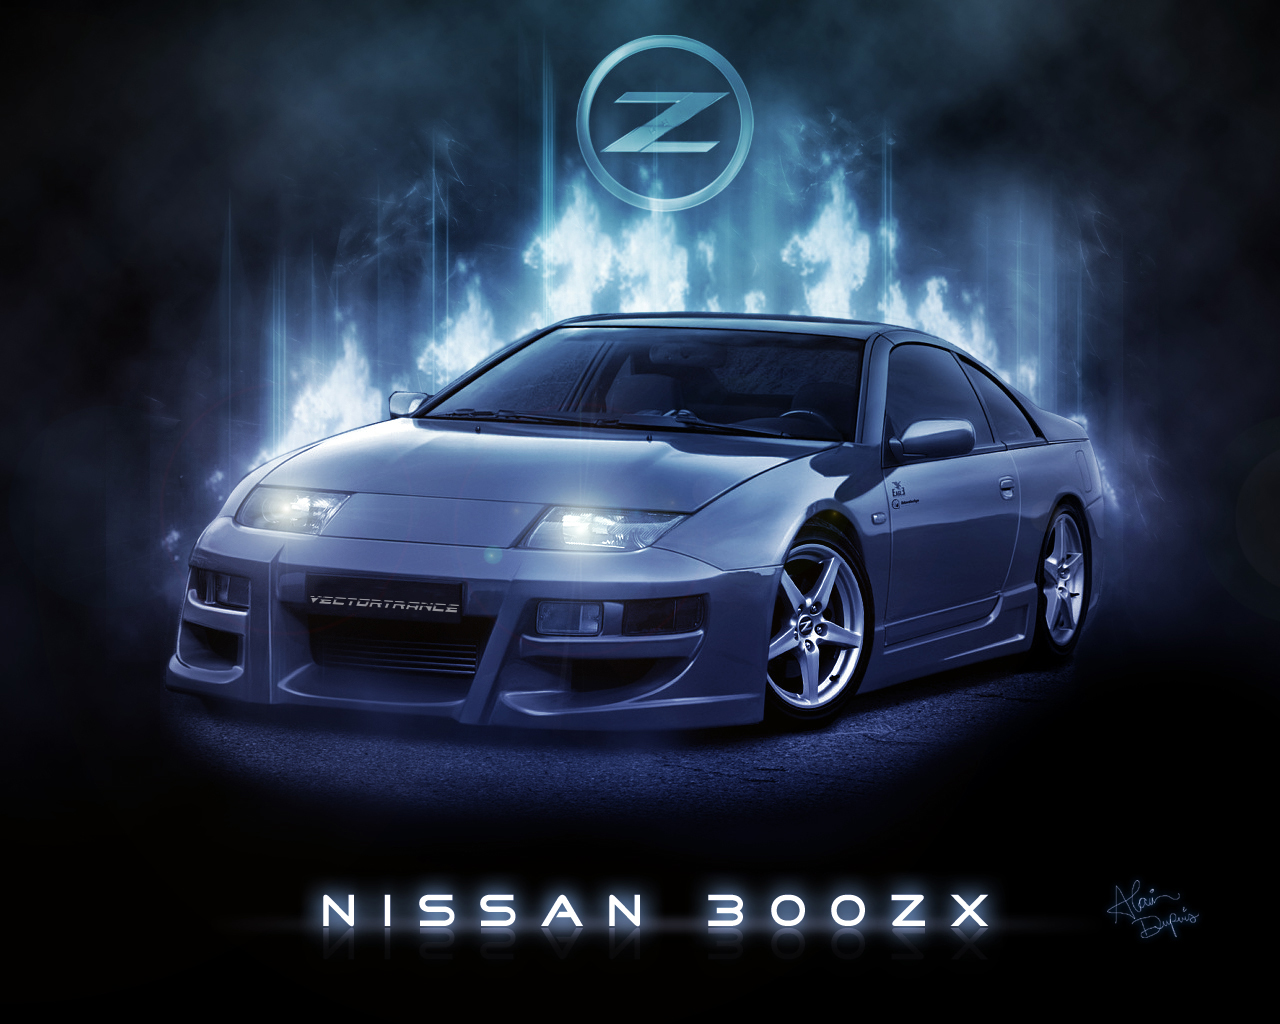 City Motion with a Nissan 300zx  Full CGI  Behance